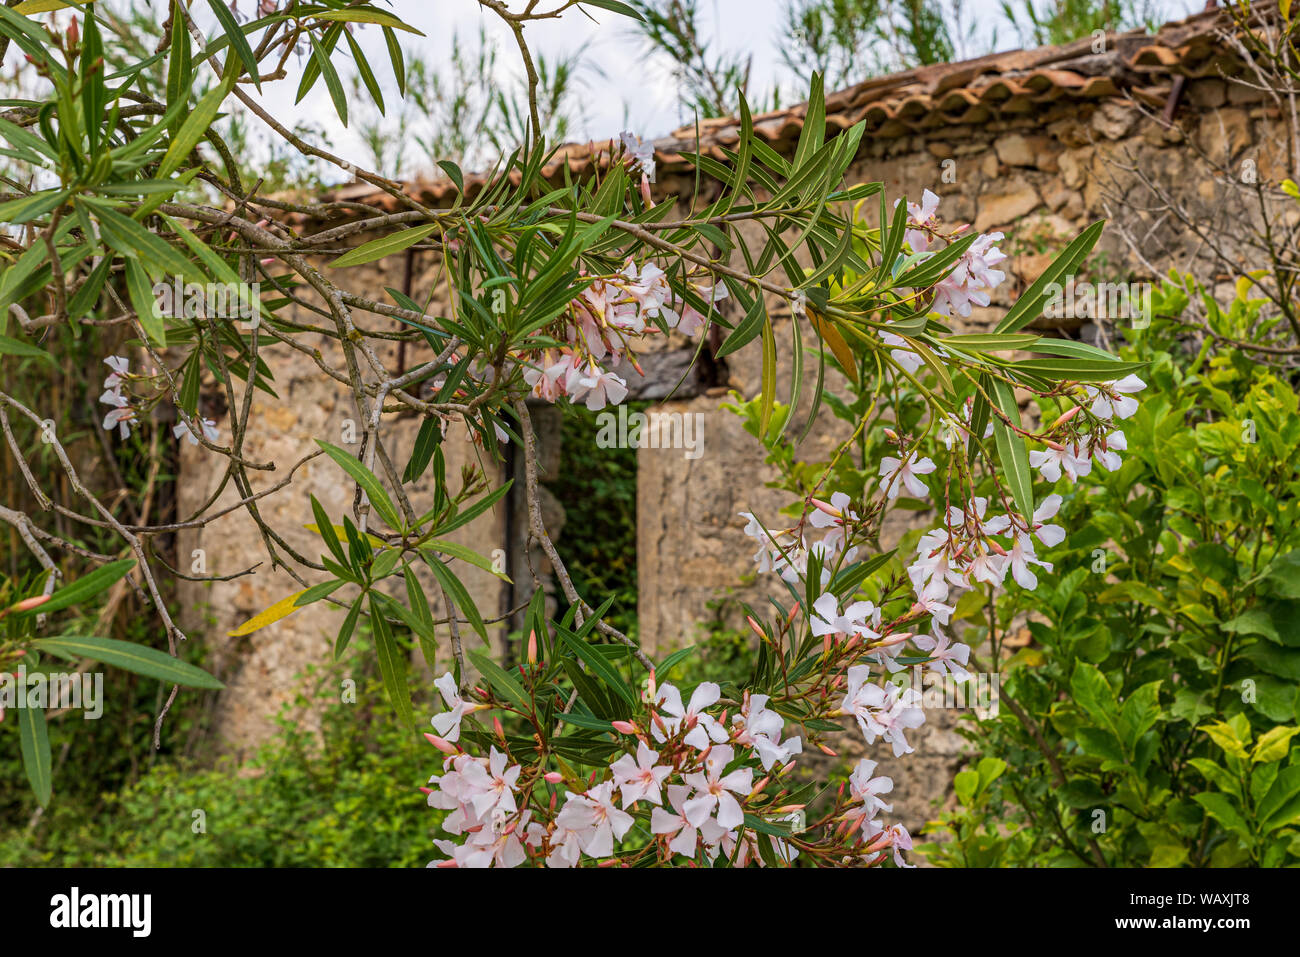 Old, abandoned ruin behind a white flowering oleander bush Stock Photo